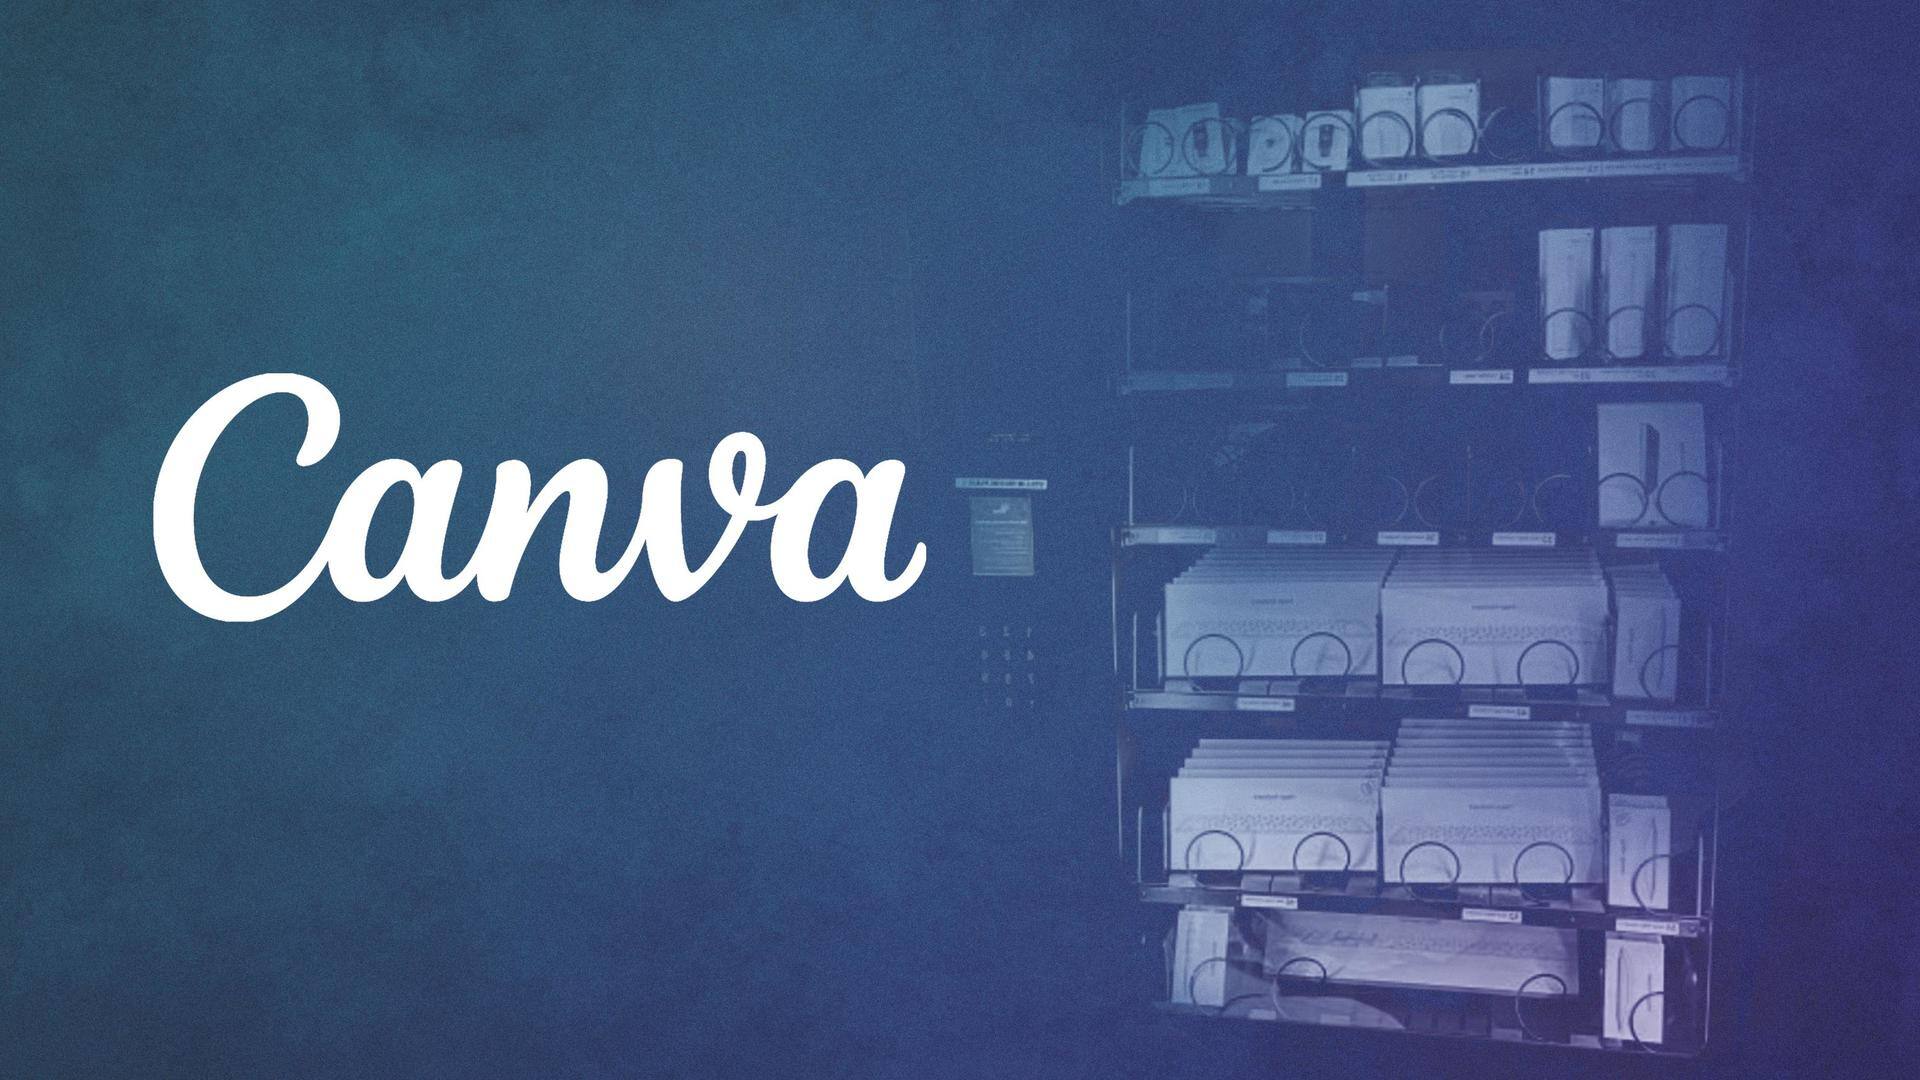 Canva shakes up the workspace: Introduces laptop accessories vending machine